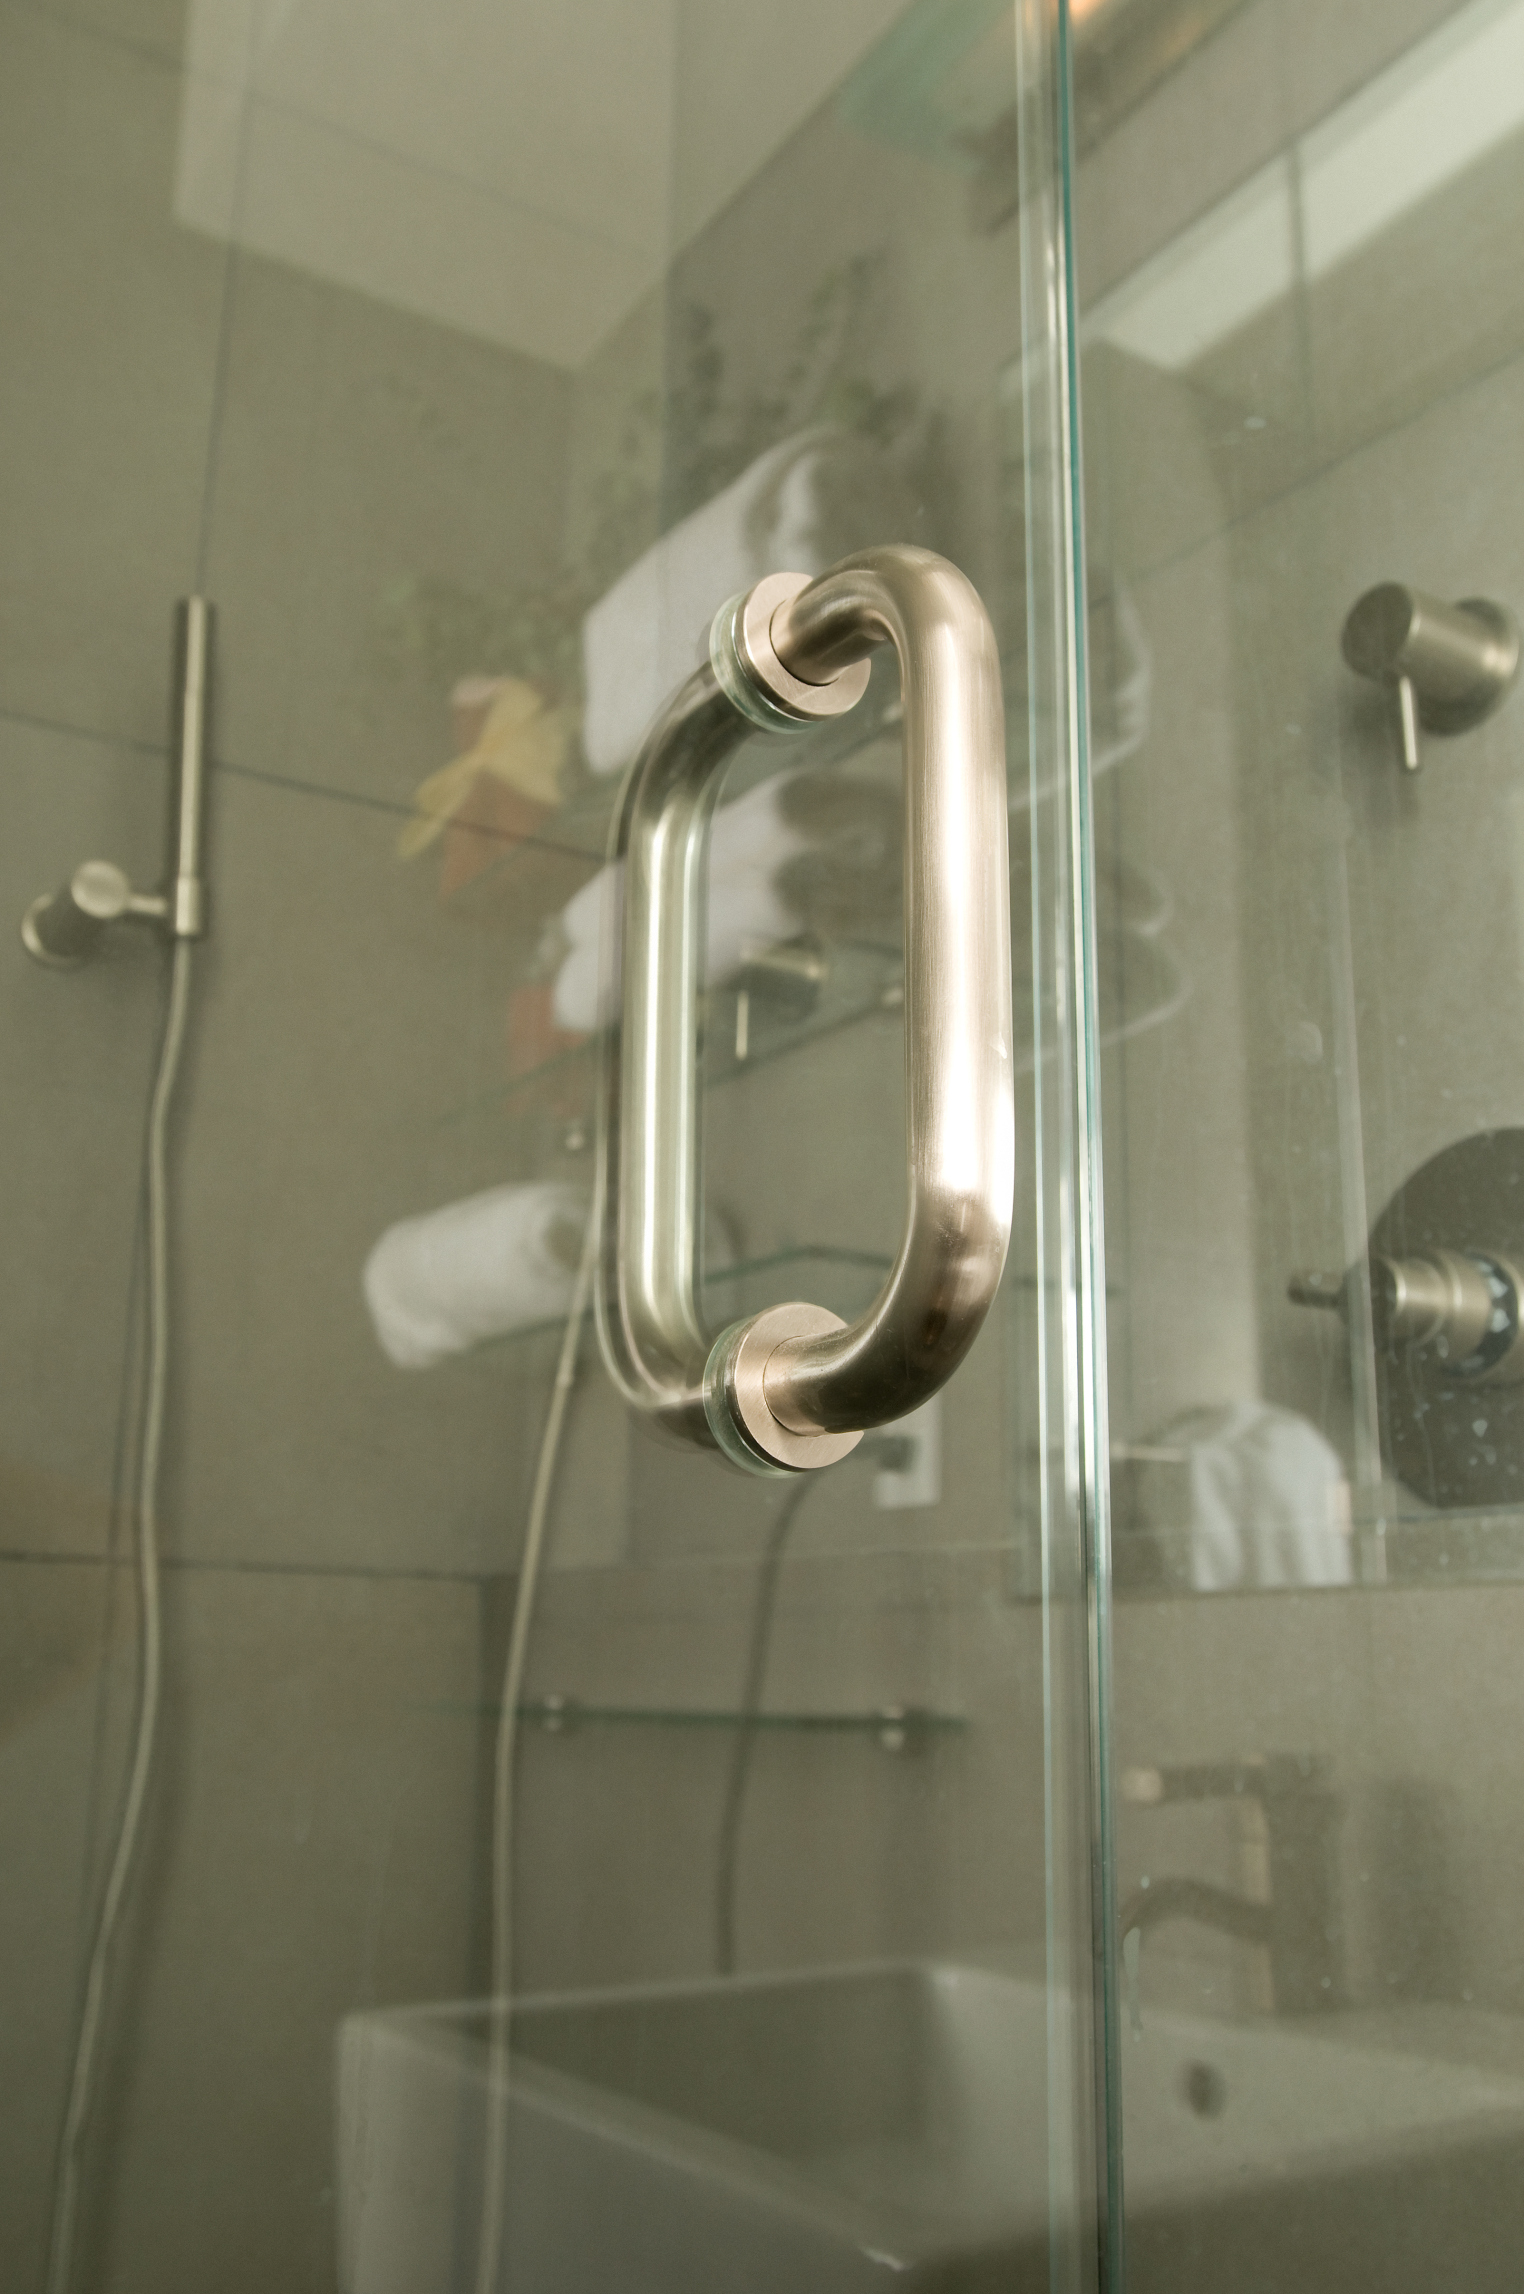 How to clean glass shower doors, according to cleaning experts